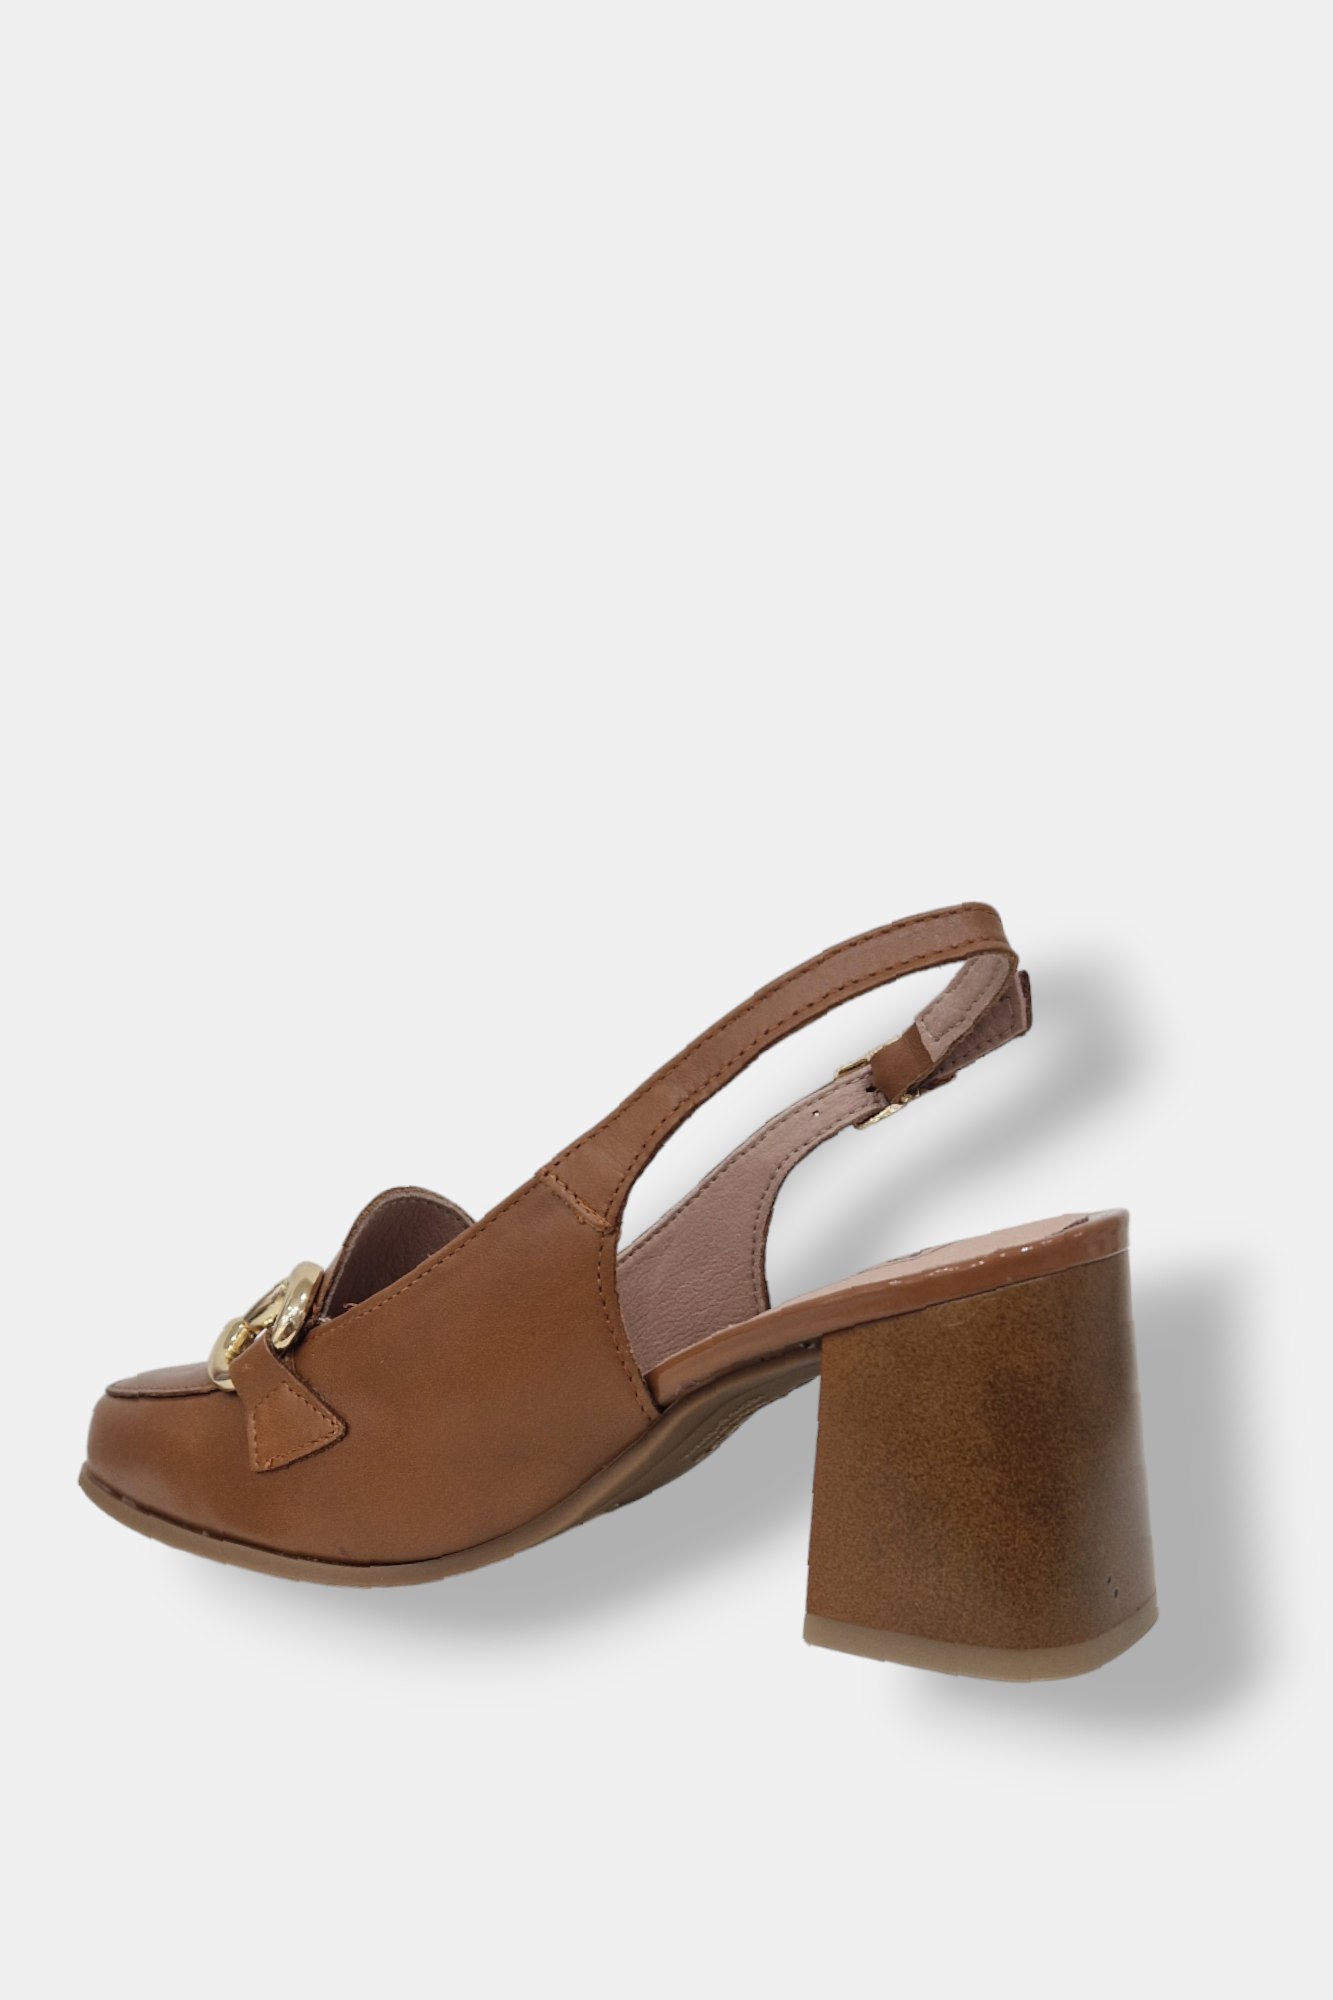 PITILLOS 5793 TAN LEATHER HEELED LOAFER